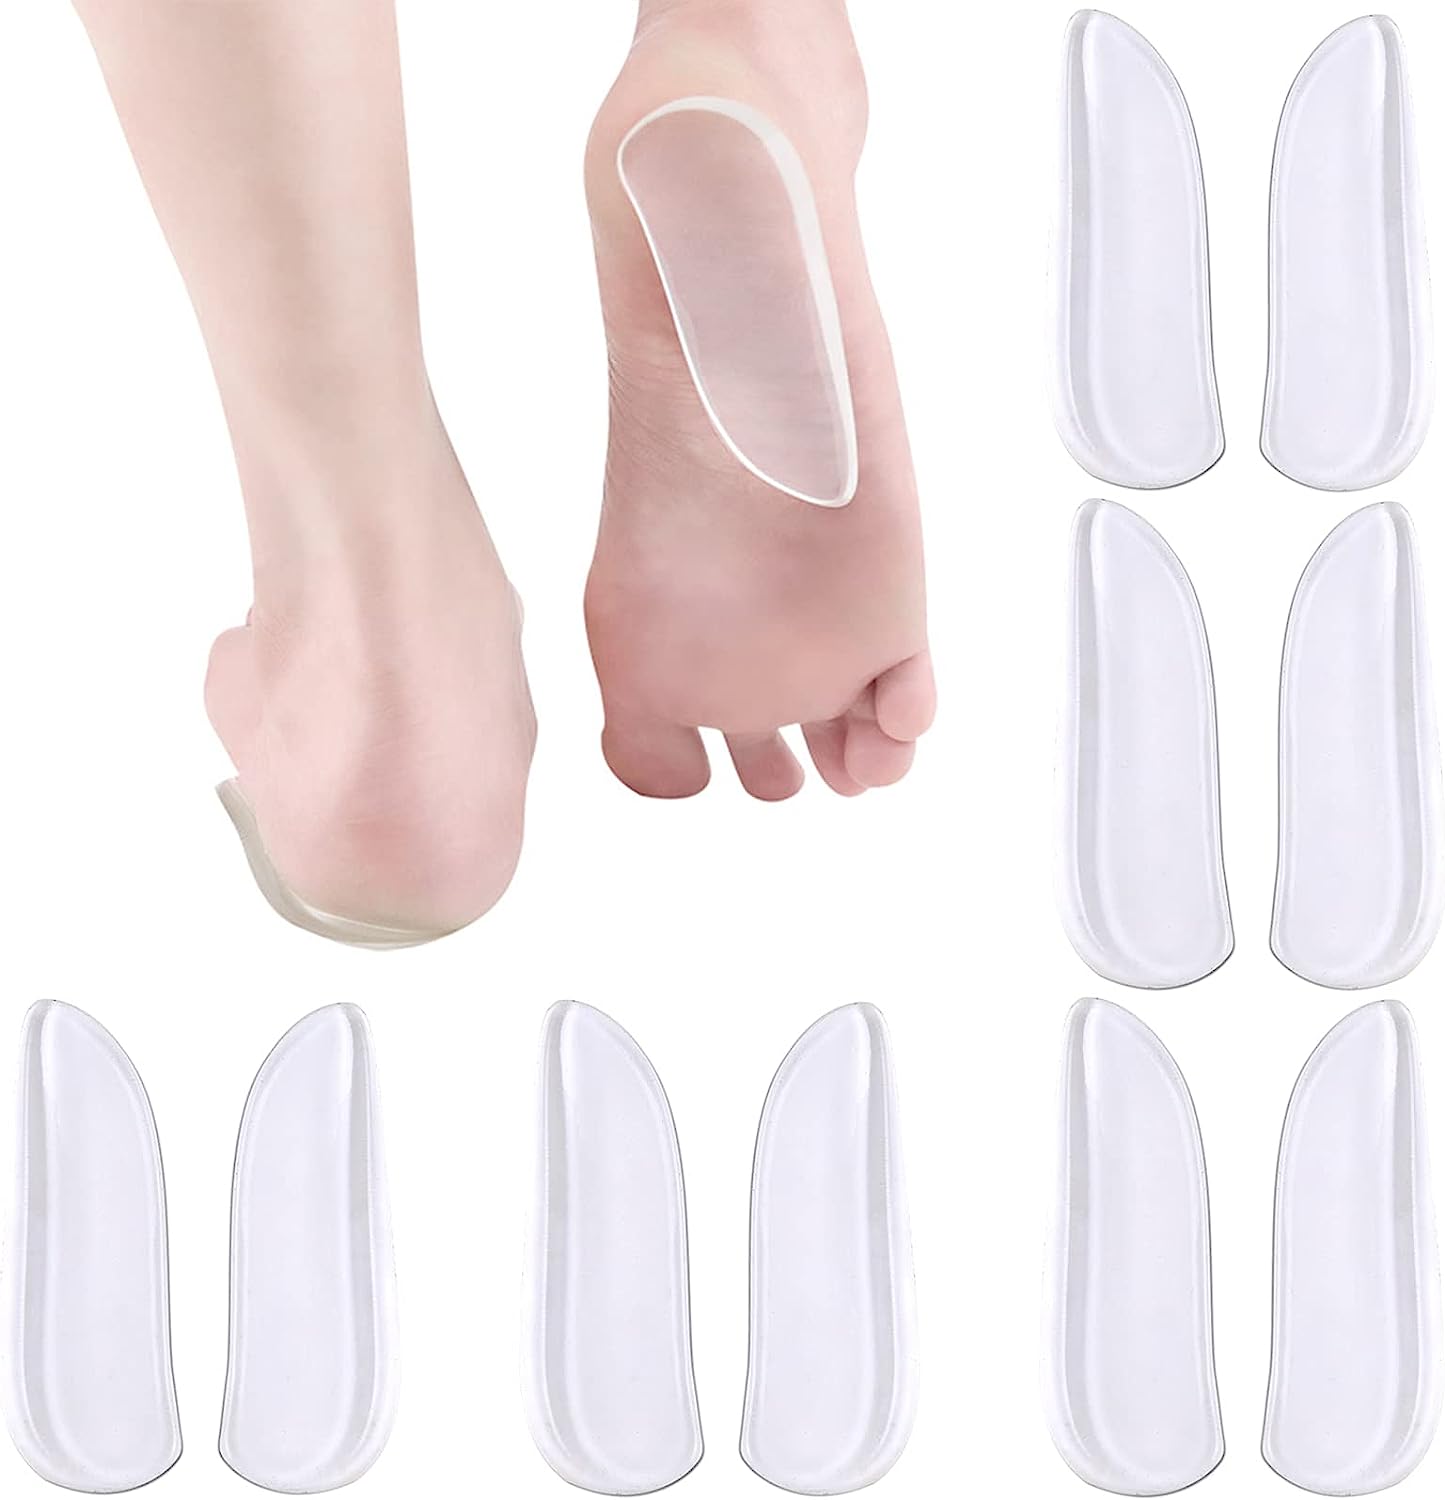 shoe inserts for knee pain review